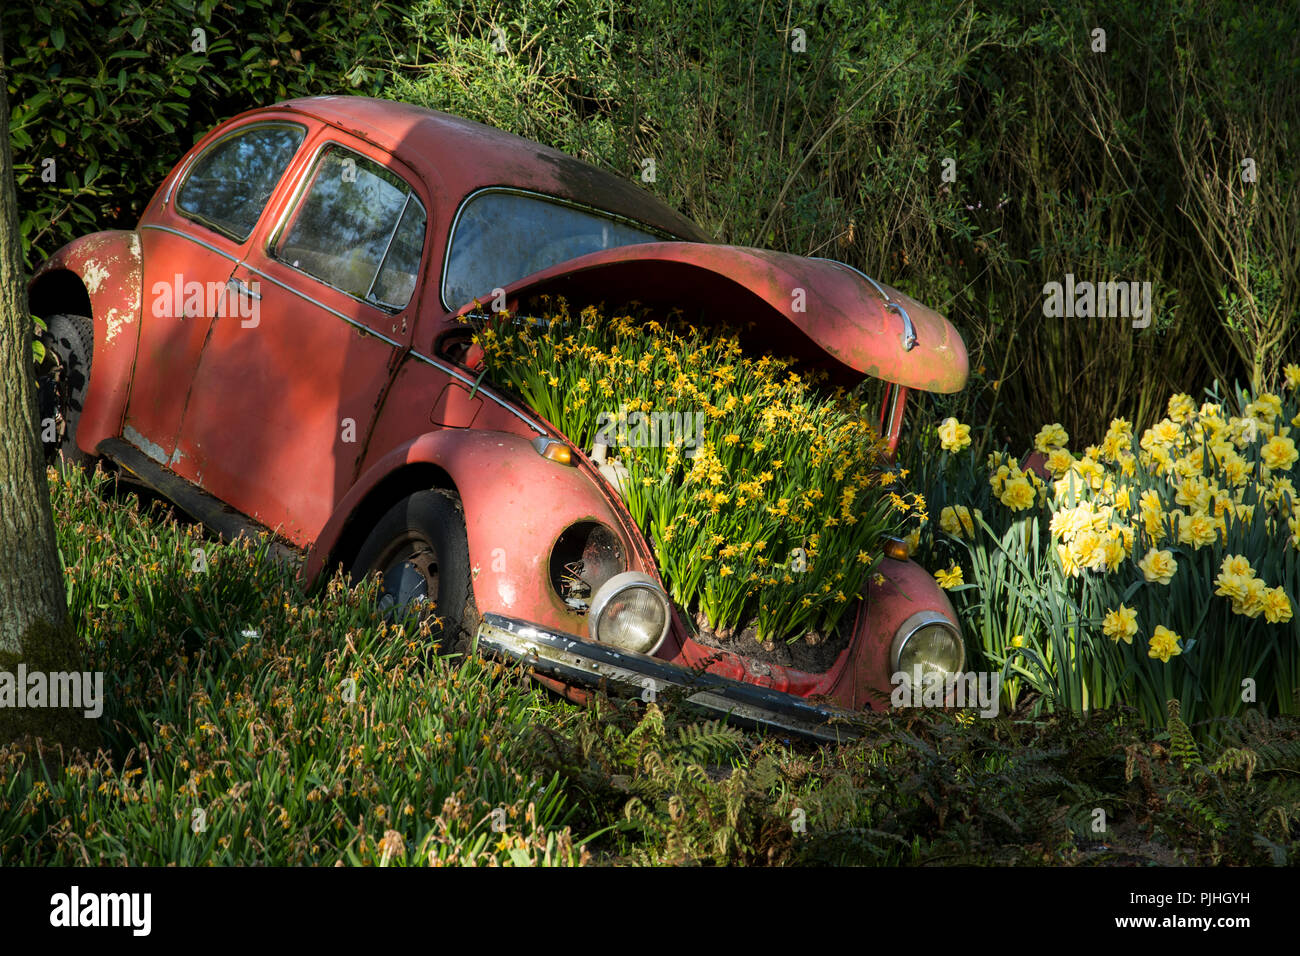 Old Volkswagen planted with bulb flowers Stock Photo